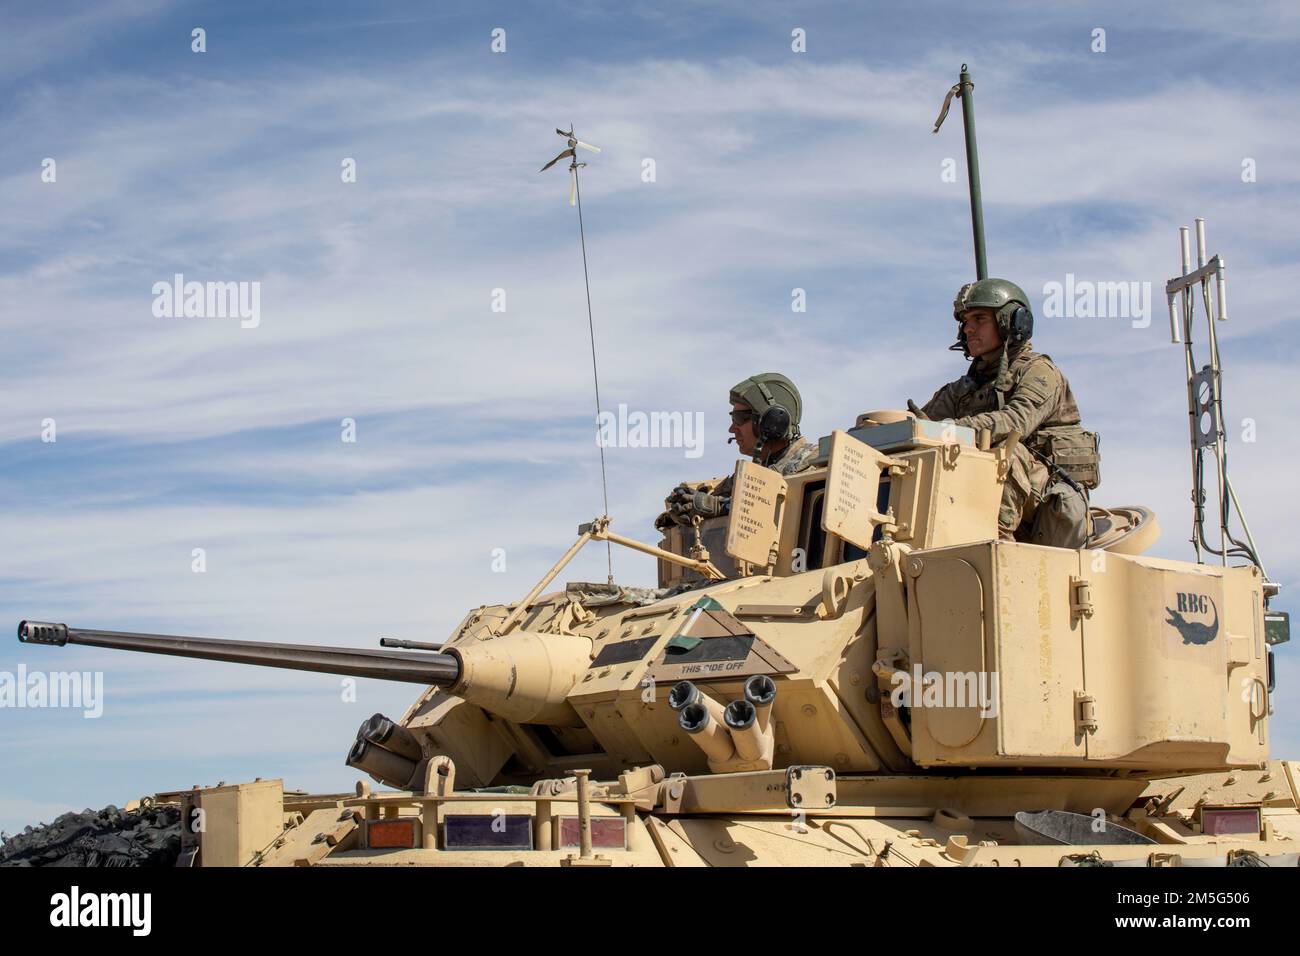 Soldiers of 2nd Armored Brigade Combat Team, 1st Armored Division observe their peers shoot targets from atop their Bradley Fighting Vehicle near Fort Bliss, Texas on March 16, 2022. 2nd BDE is performing gunnery tables for future training. Stock Photo